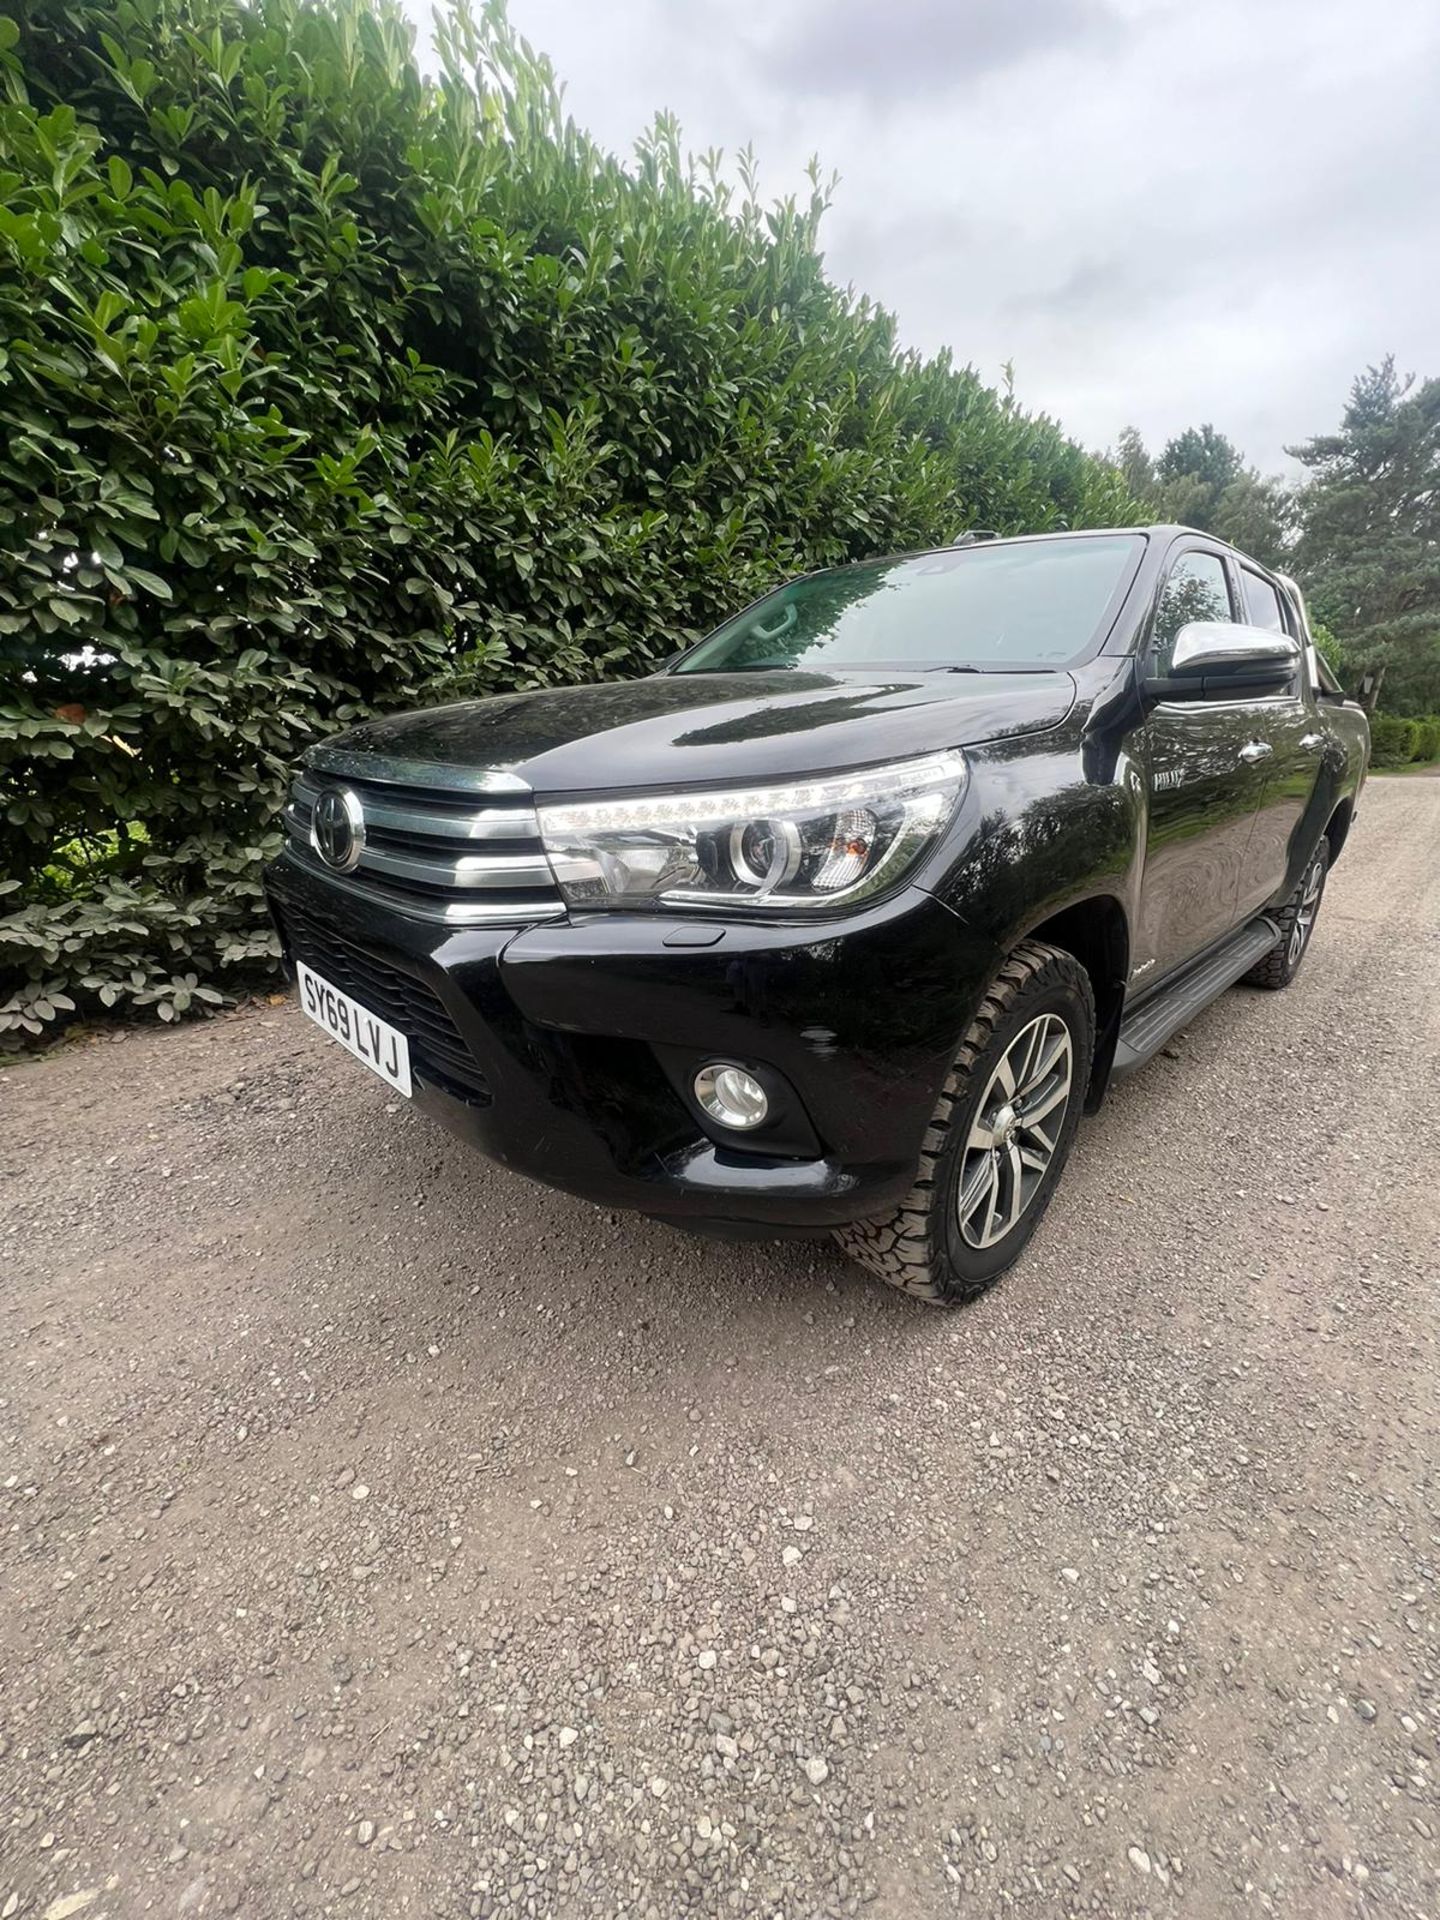 TOYOTA HILUX INVISIBLE 2019 FULL V5 - Image 3 of 15